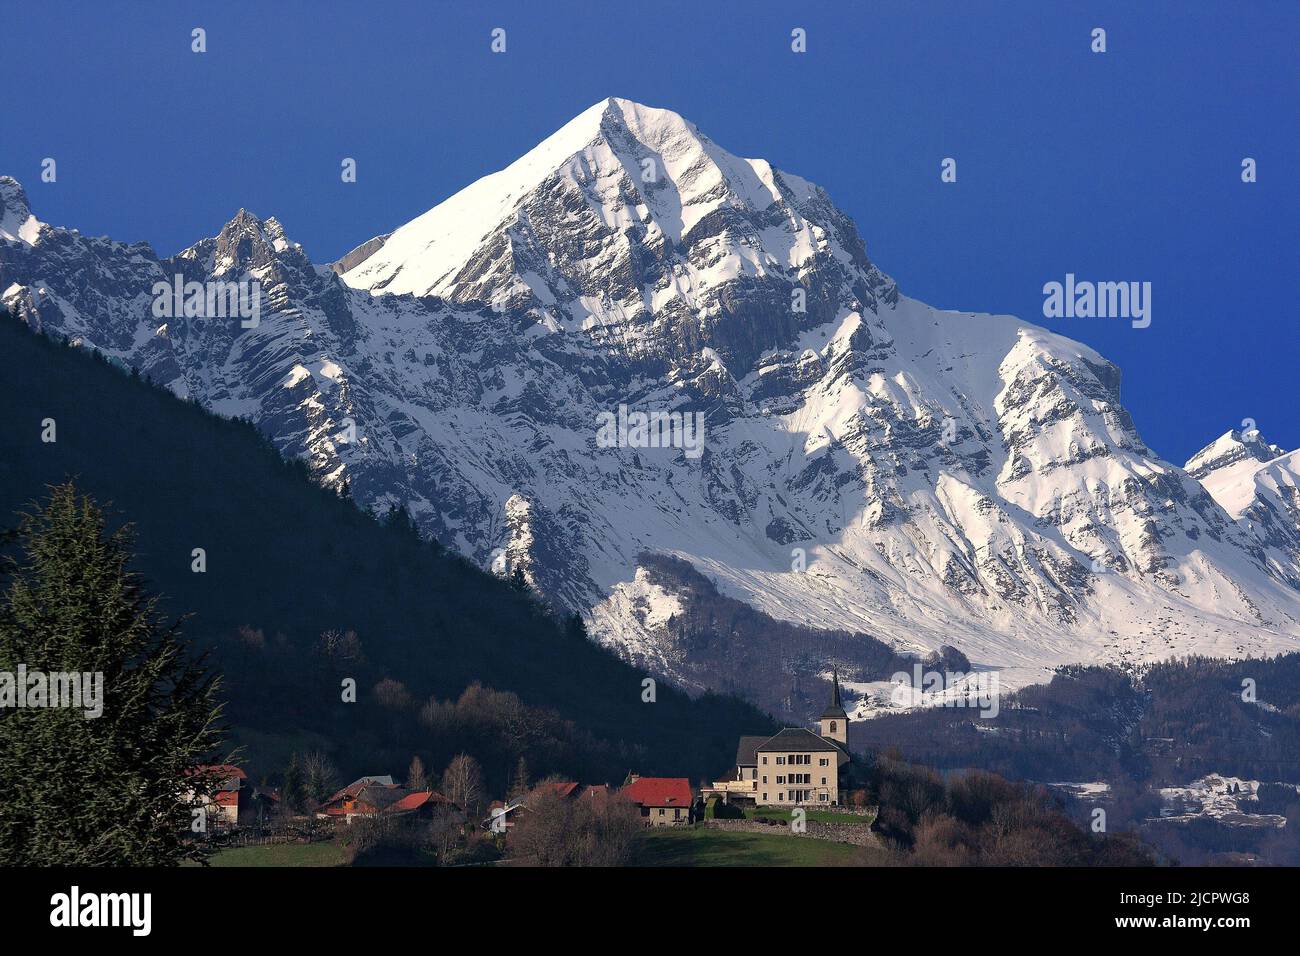 France, Savoie Albertville, the village of Pallud and the snowy Mont-Charvin Stock Photo